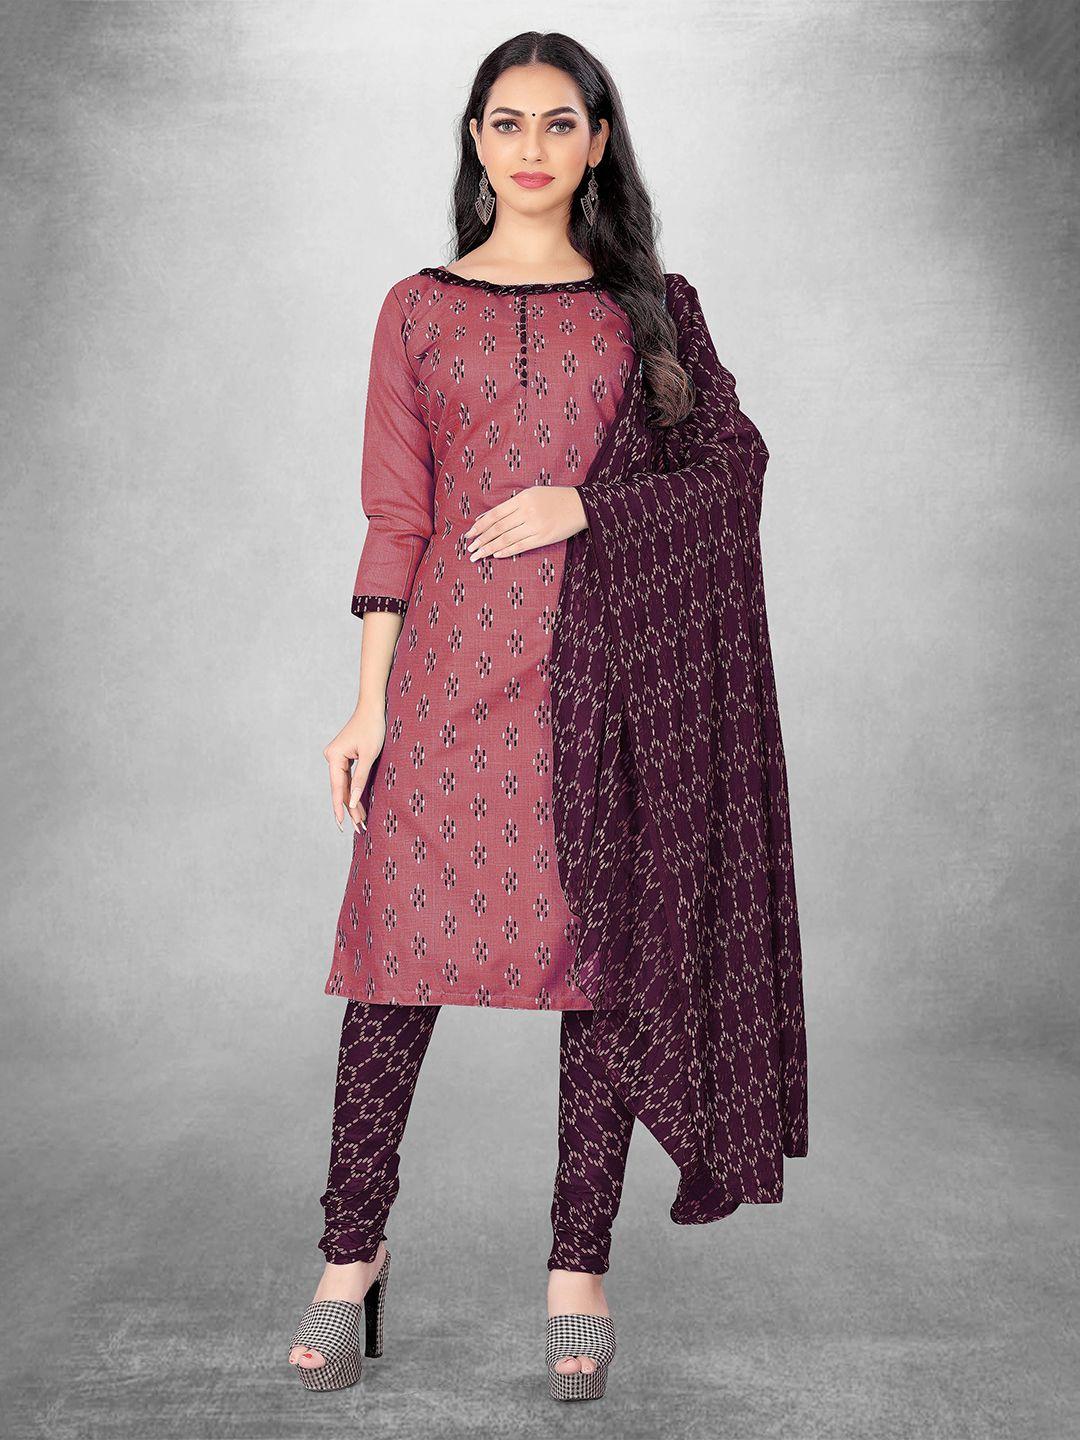 manvaa purple printed unstitched dress material